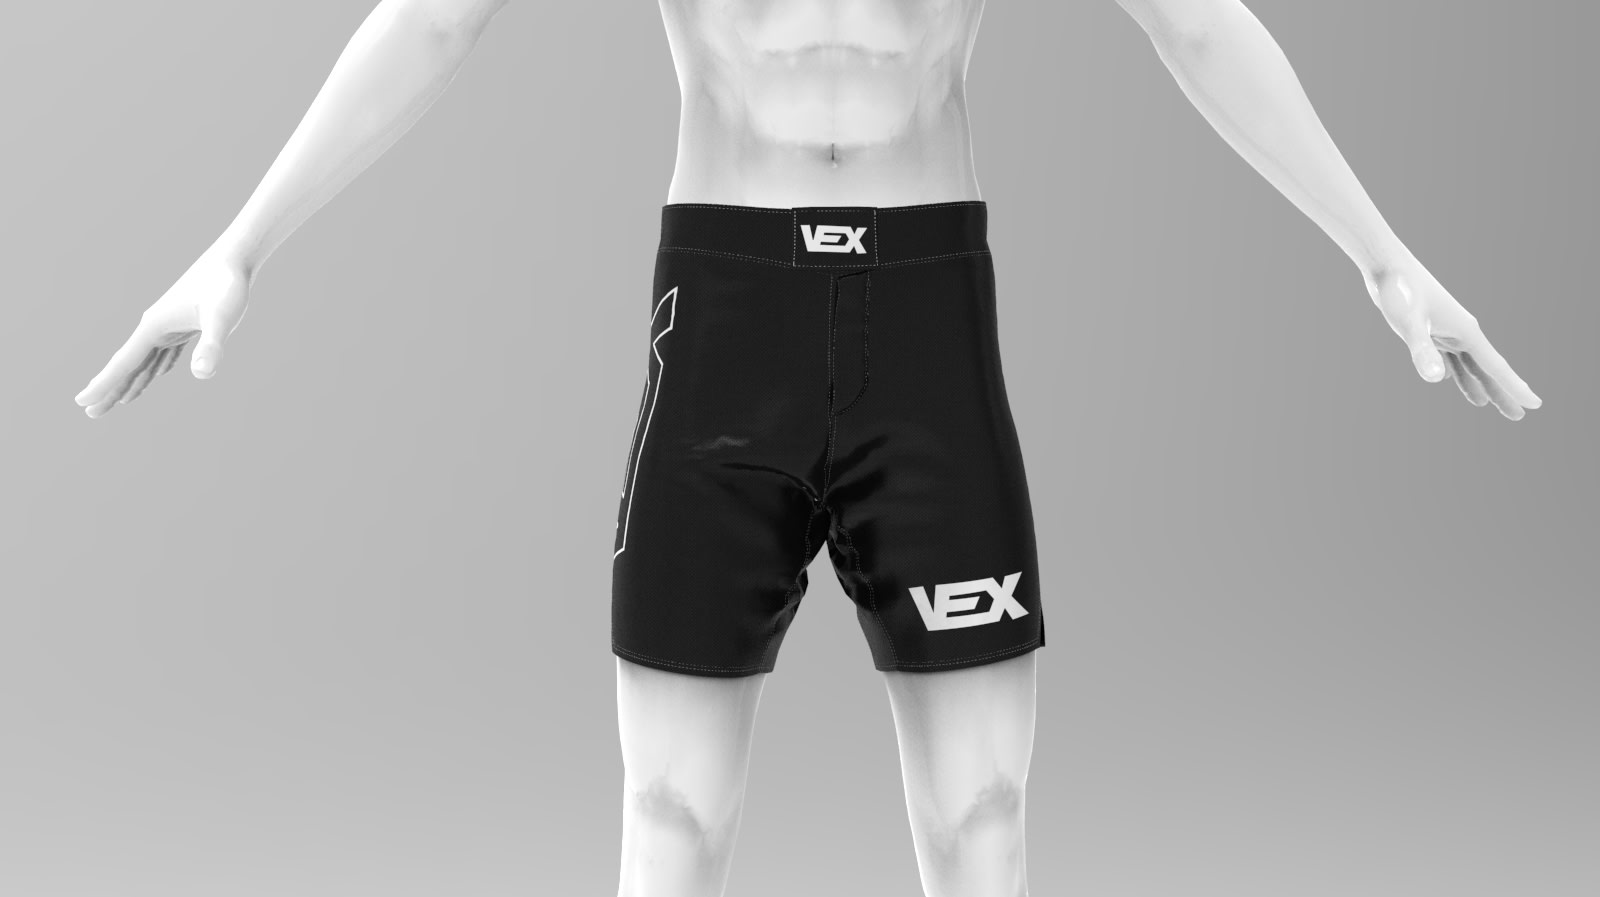 Download Do A Mma Shorts 3d Mockup To List On Ebay Or Amazon By Xelenttraders Fiverr